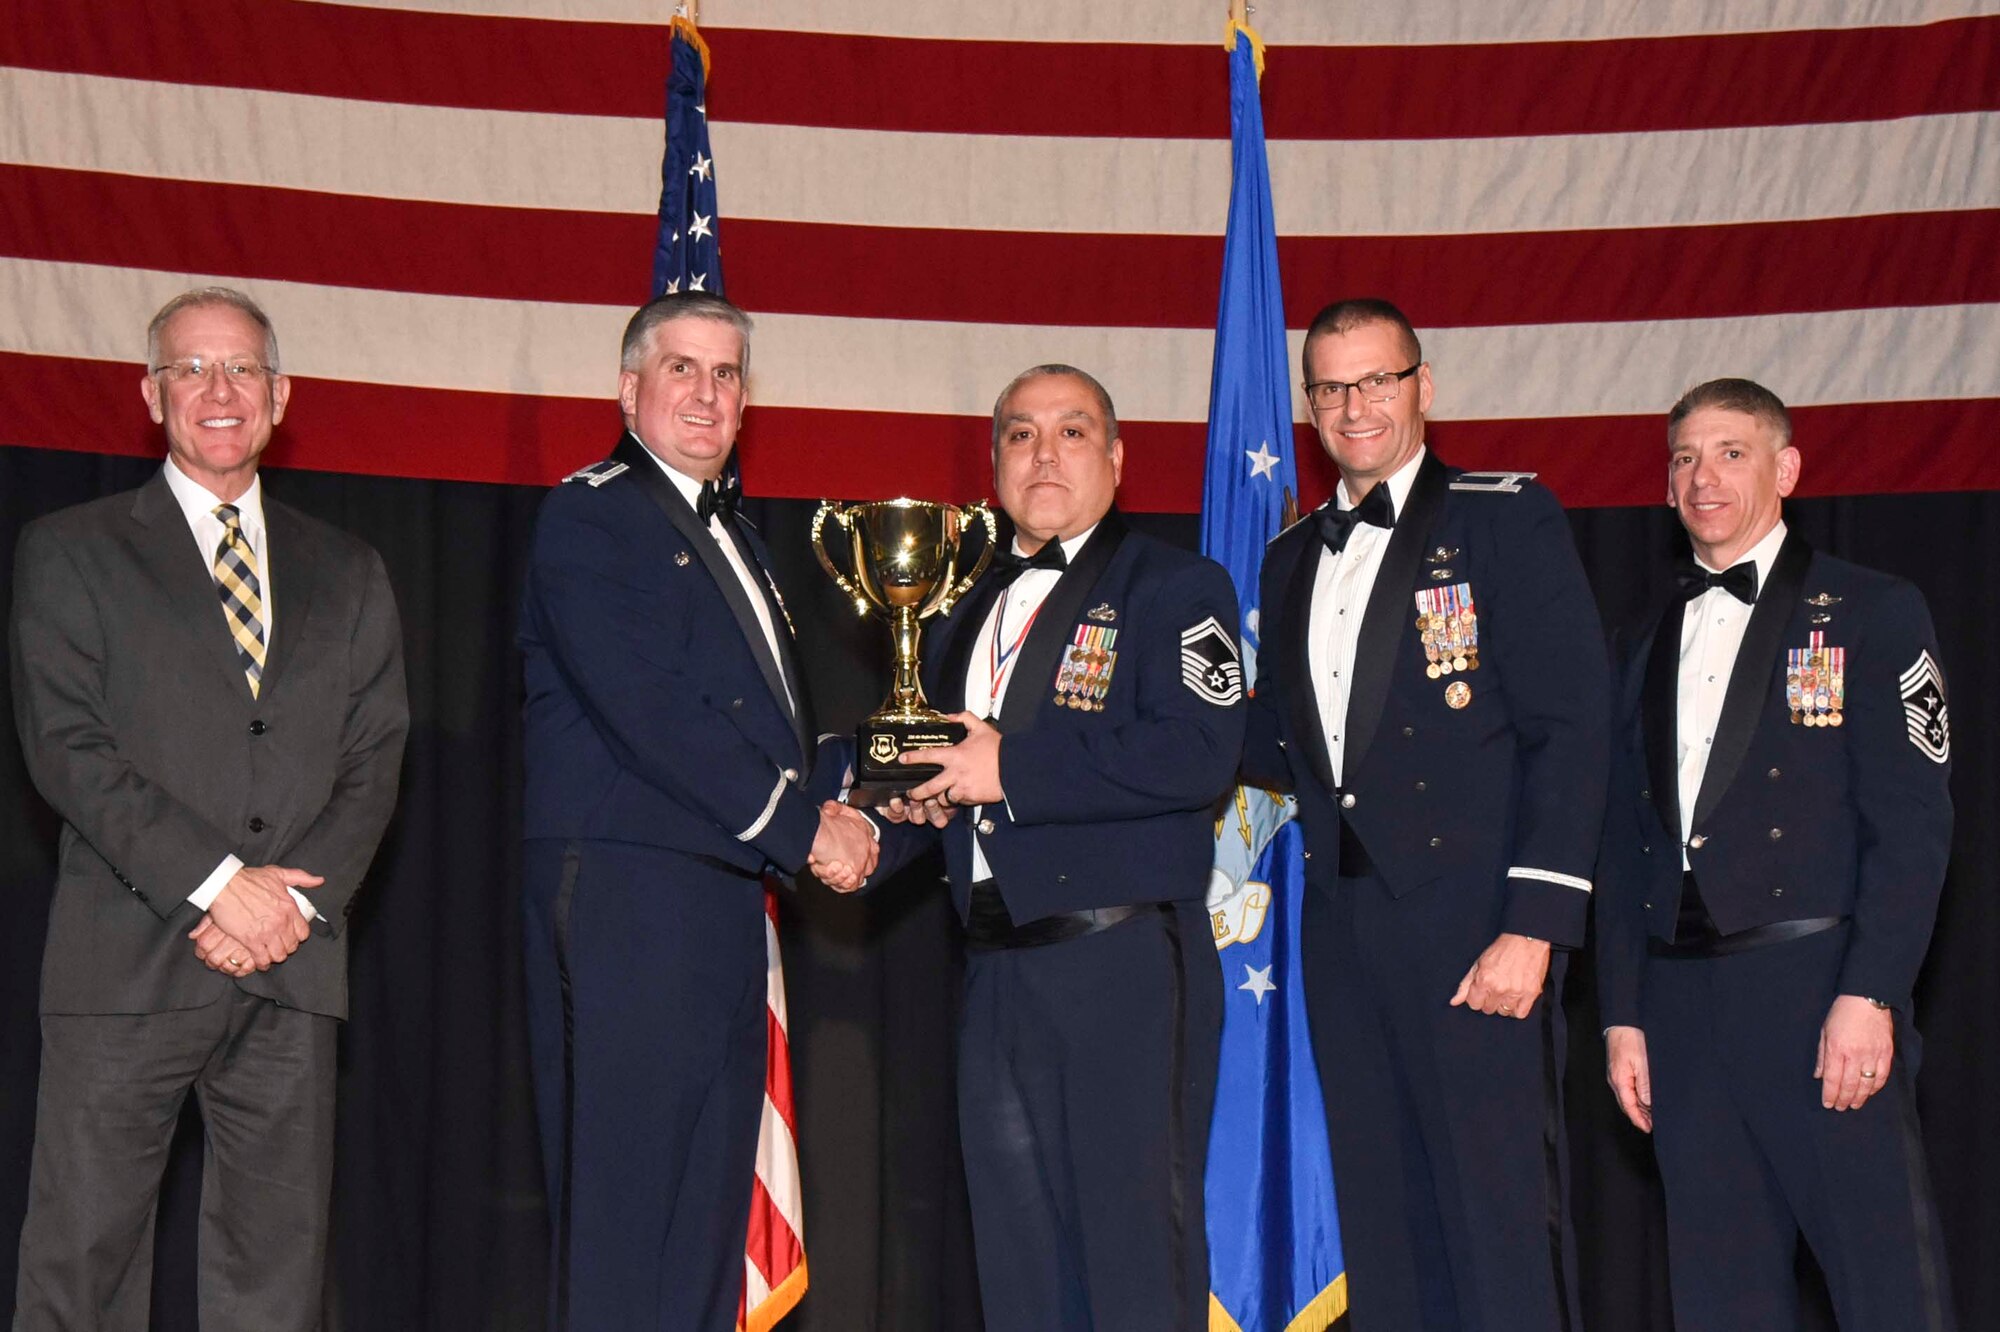 Senior Master Sgt. Gregory D. Bishop, 22nd Security Forces Squadron, center, accepts the 2016 Senior Noncommissioned Officer of the Year award, Feb. 3, 2017, at McConnell Air Force Base, Kan. The annual awards ceremony recognized military and civilian members who excel in their areas of responsibilities, leadership qualities, community involvement, self-improvement and innovation from January to December 2016. (U.S. Air Force photo/Senior Airman Christopher Thornbury)